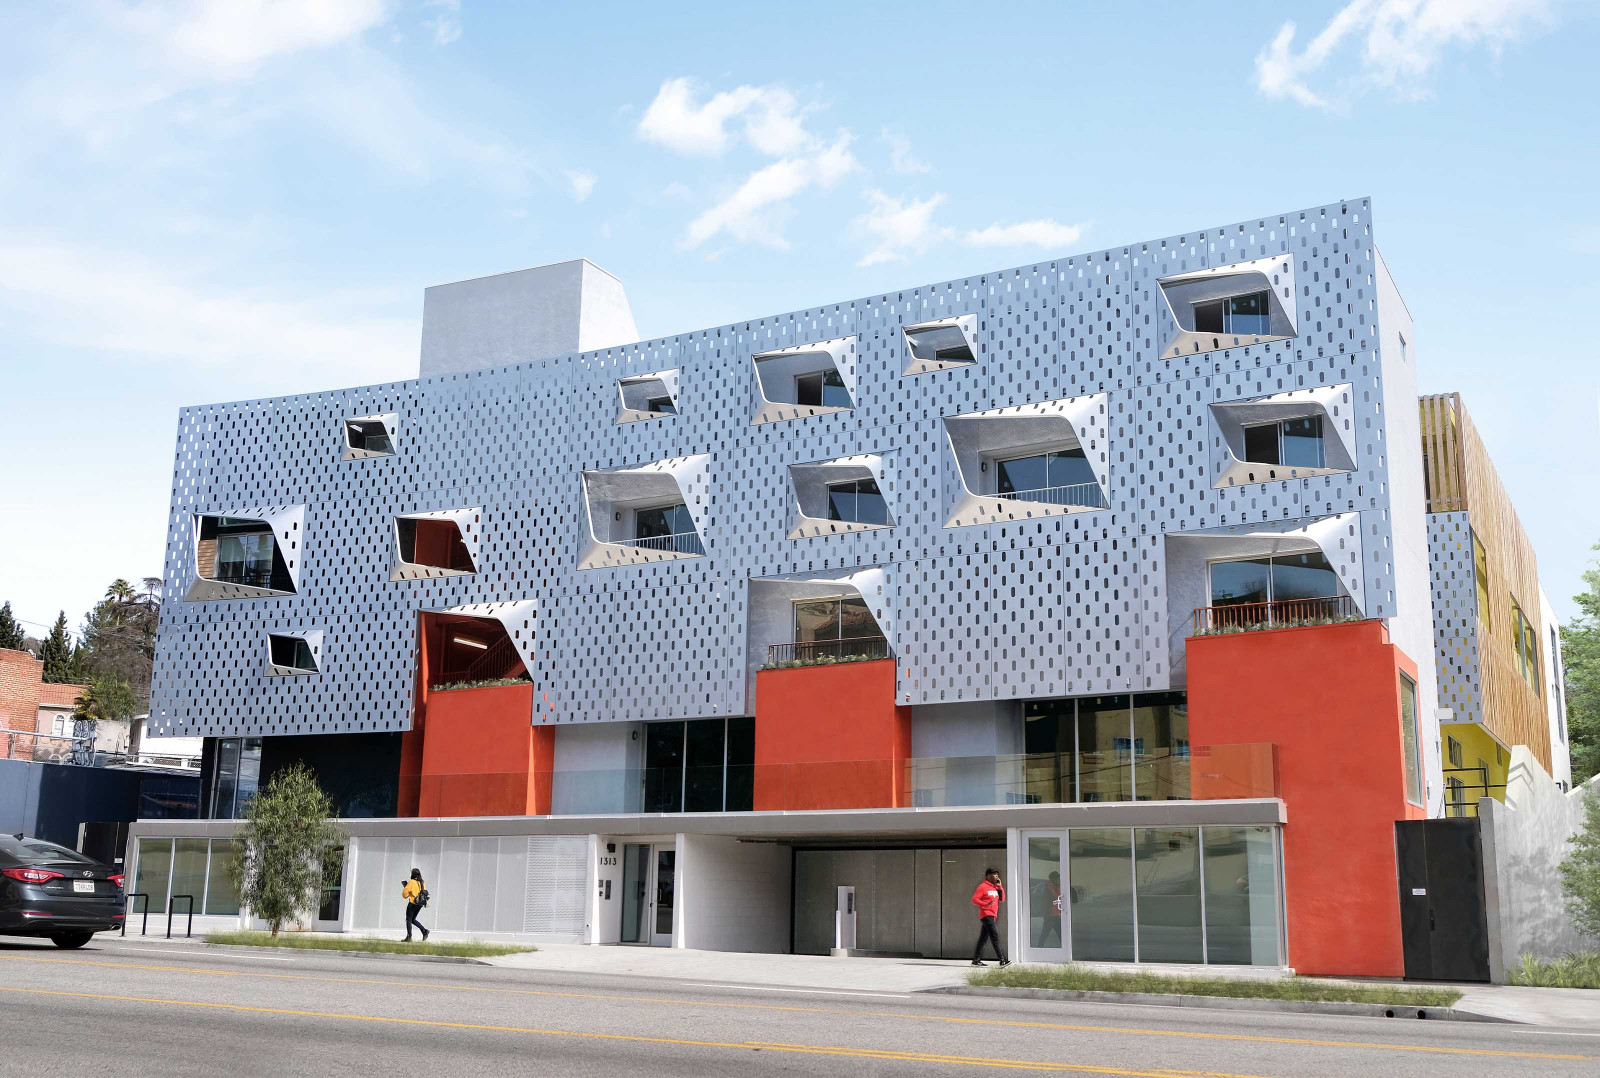 Create Three Dimensional Facades Inspired by Abstract Art